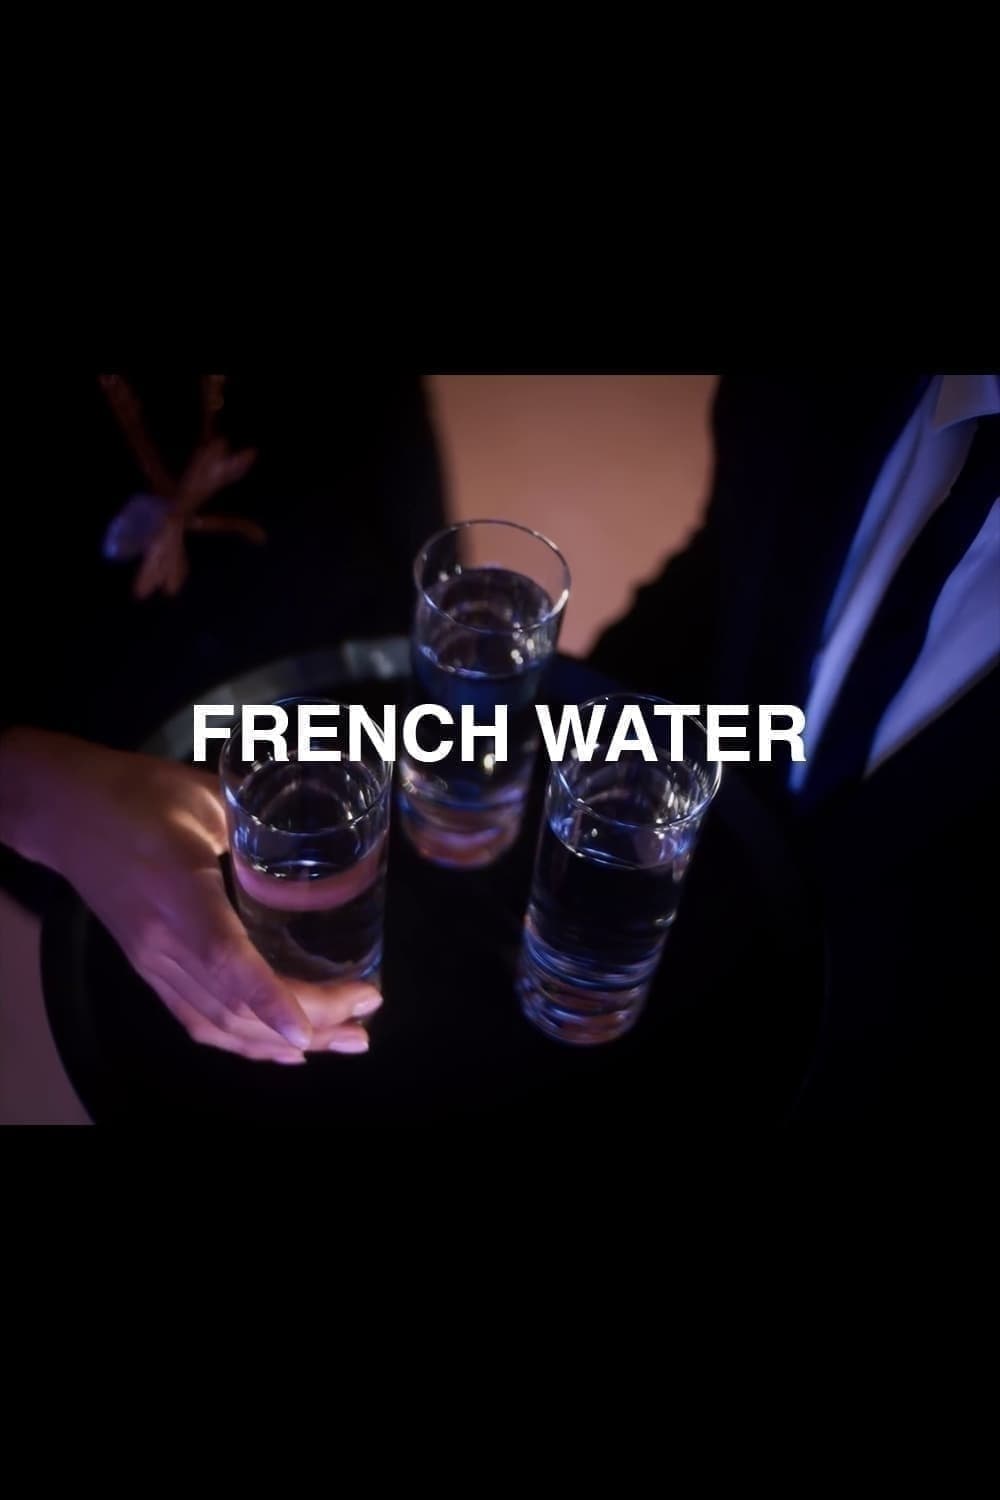 French Water (2021)